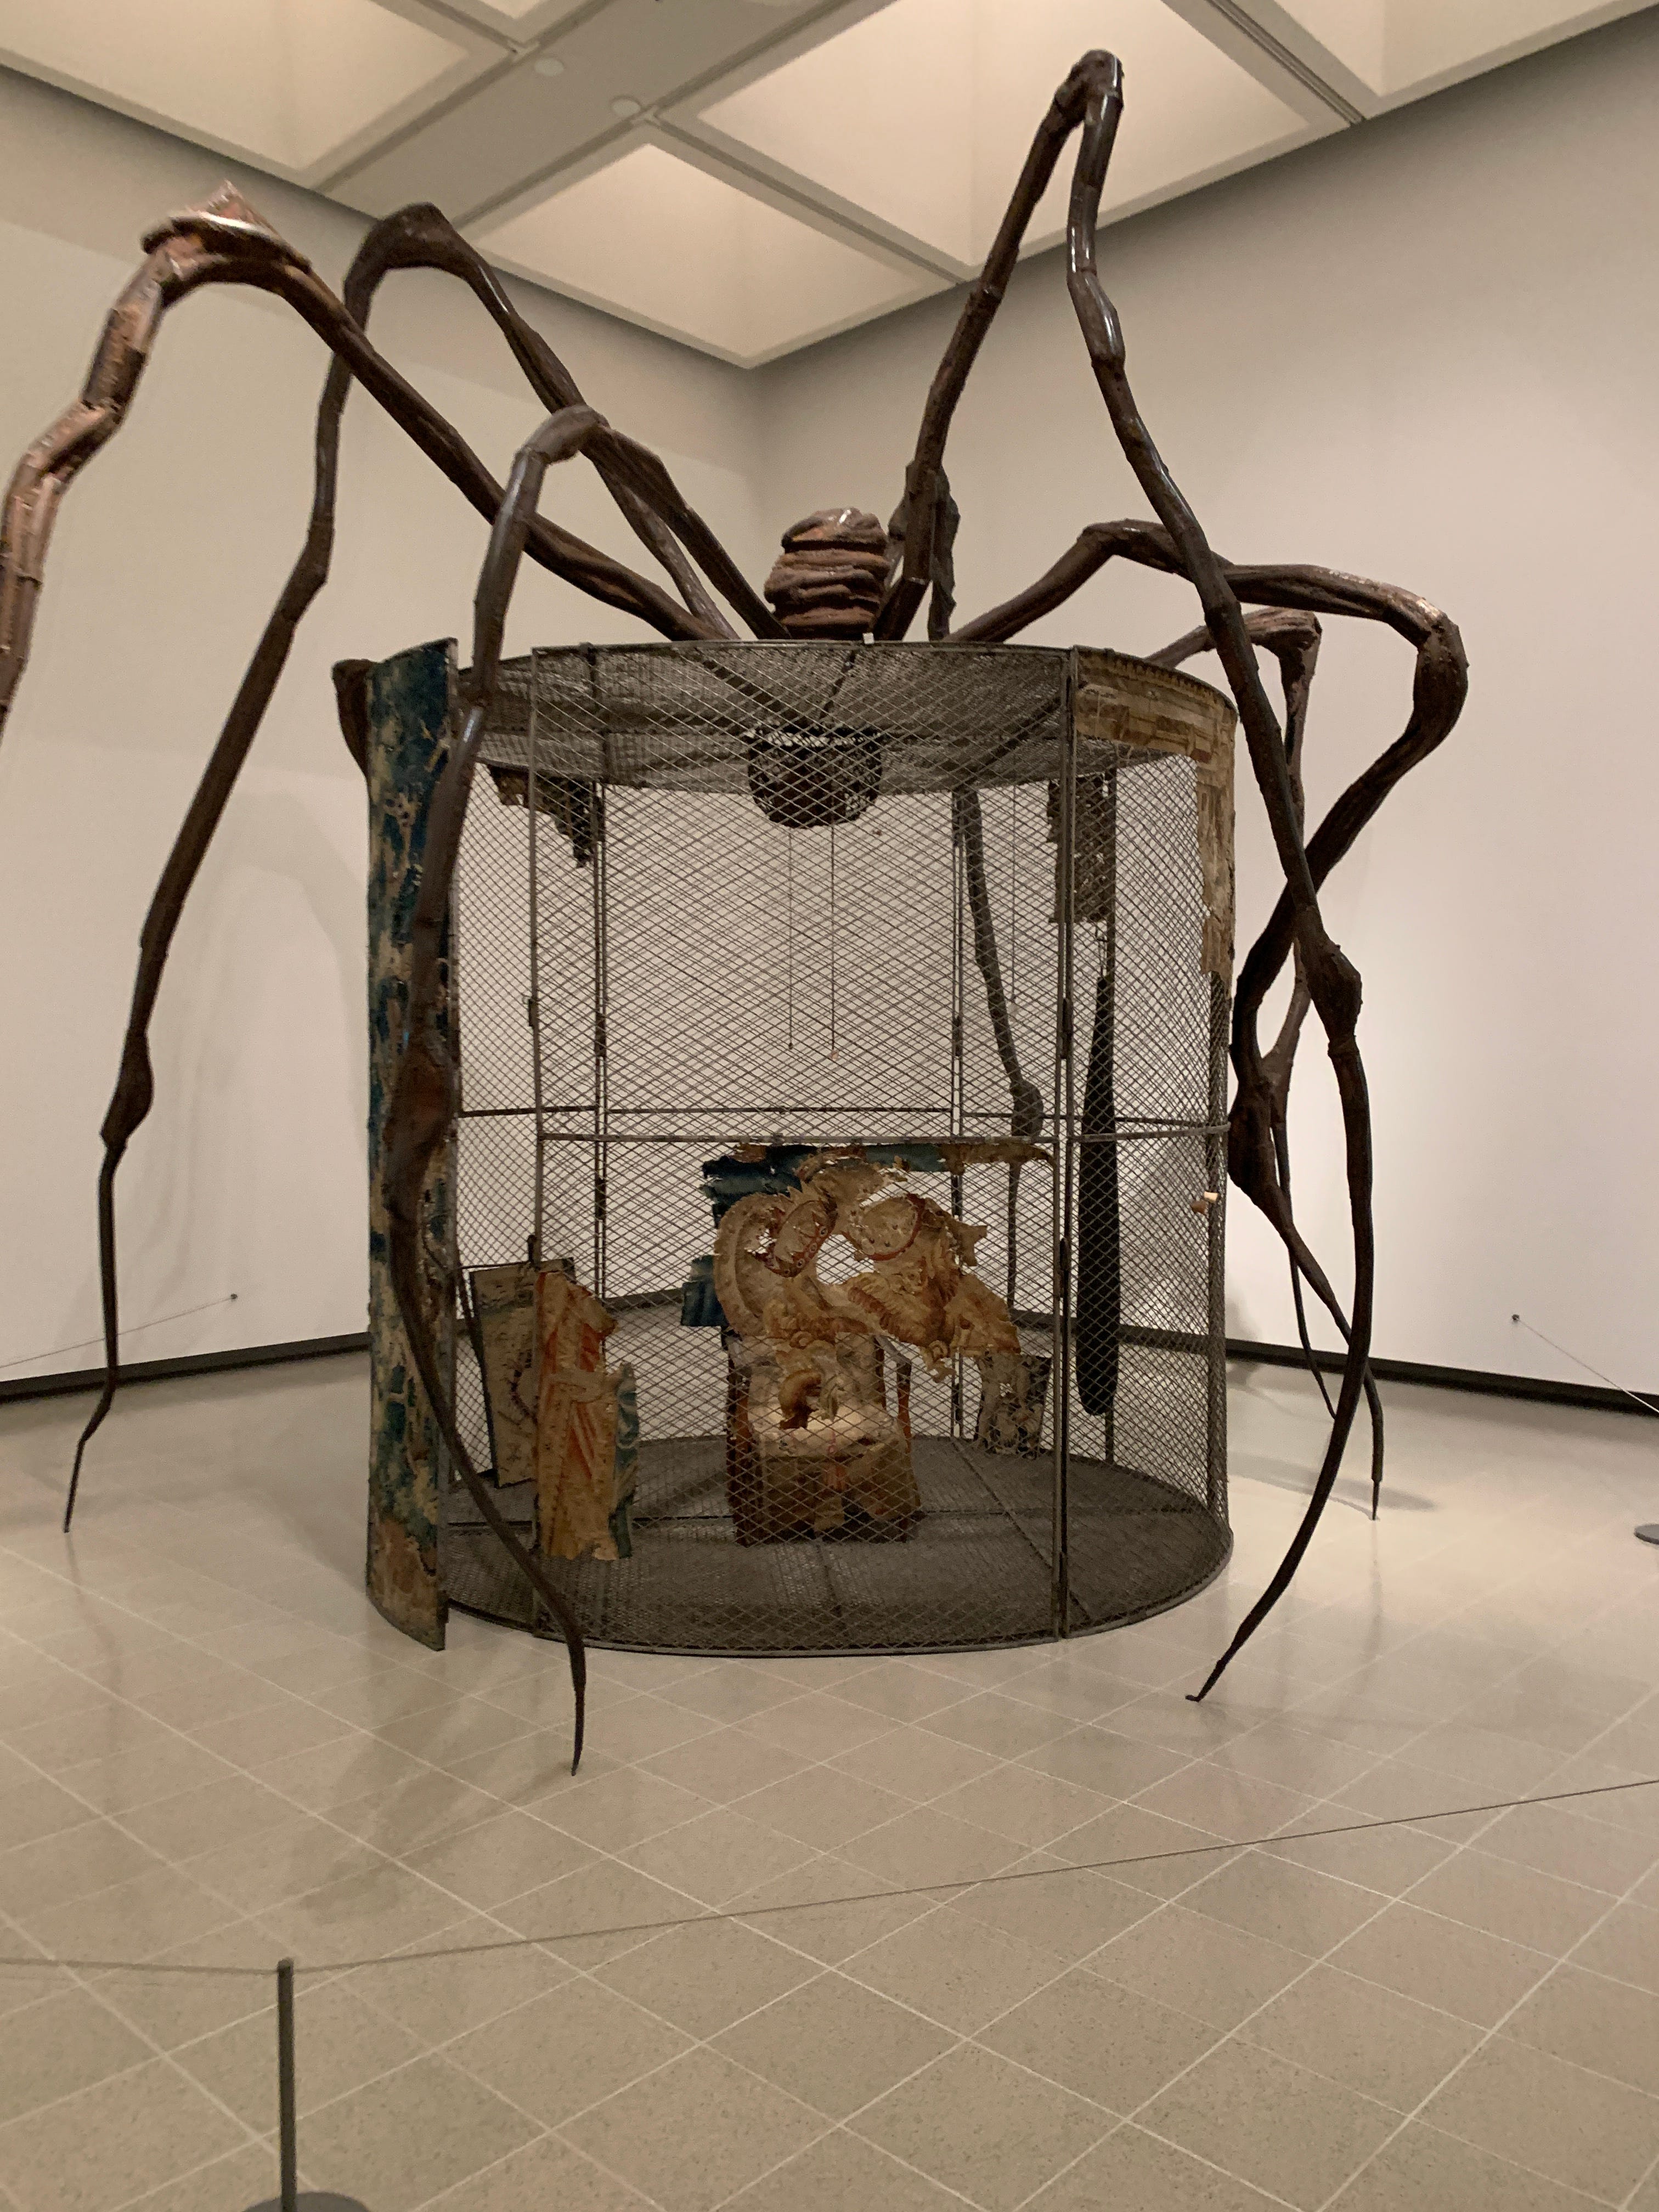 On Intimate Geometries: The Art and Life of Louise Bourgeois by